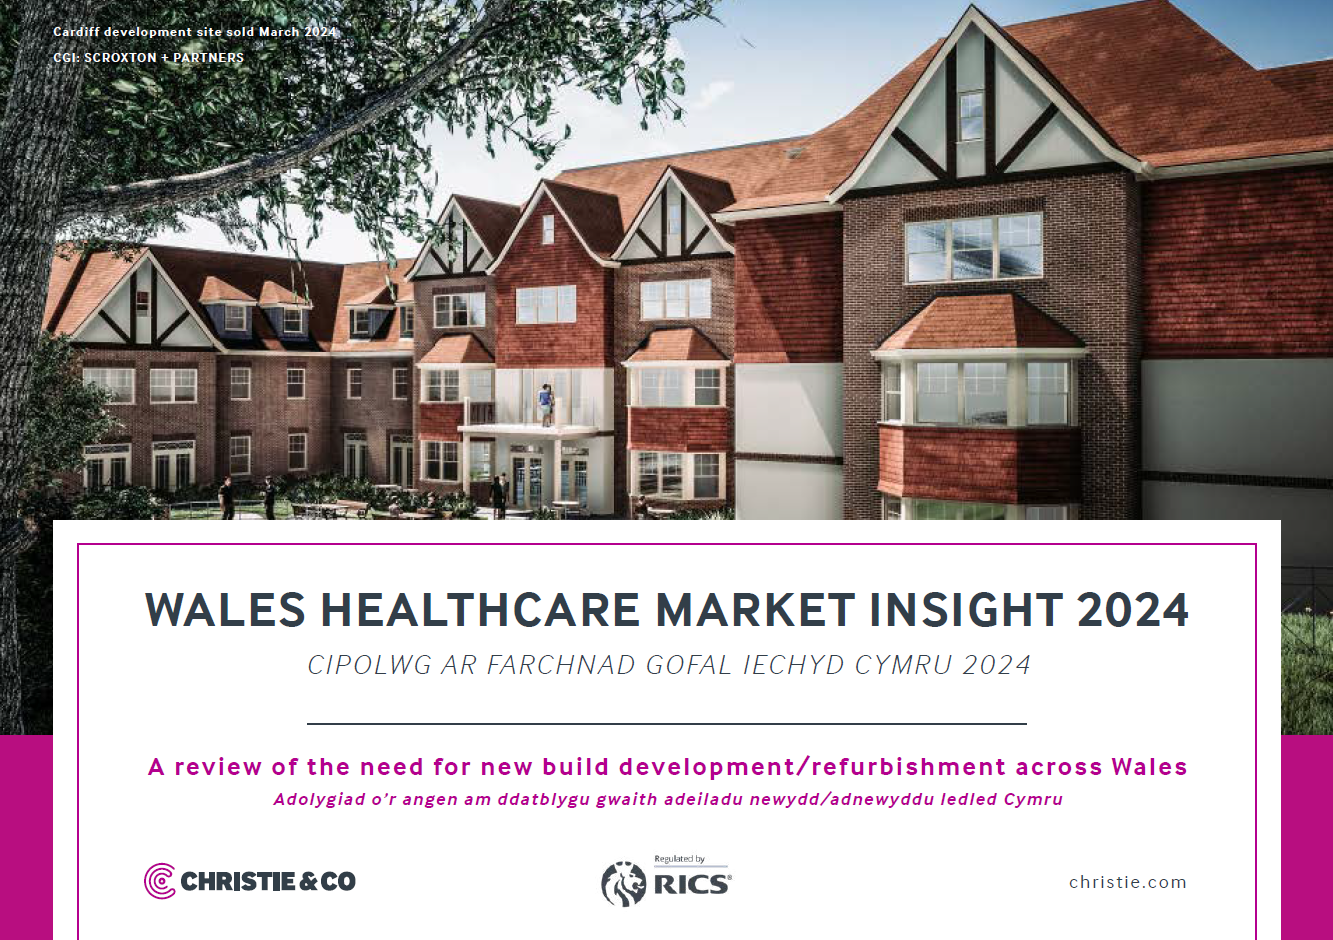 Wales Healthcare Market Insight 2024 